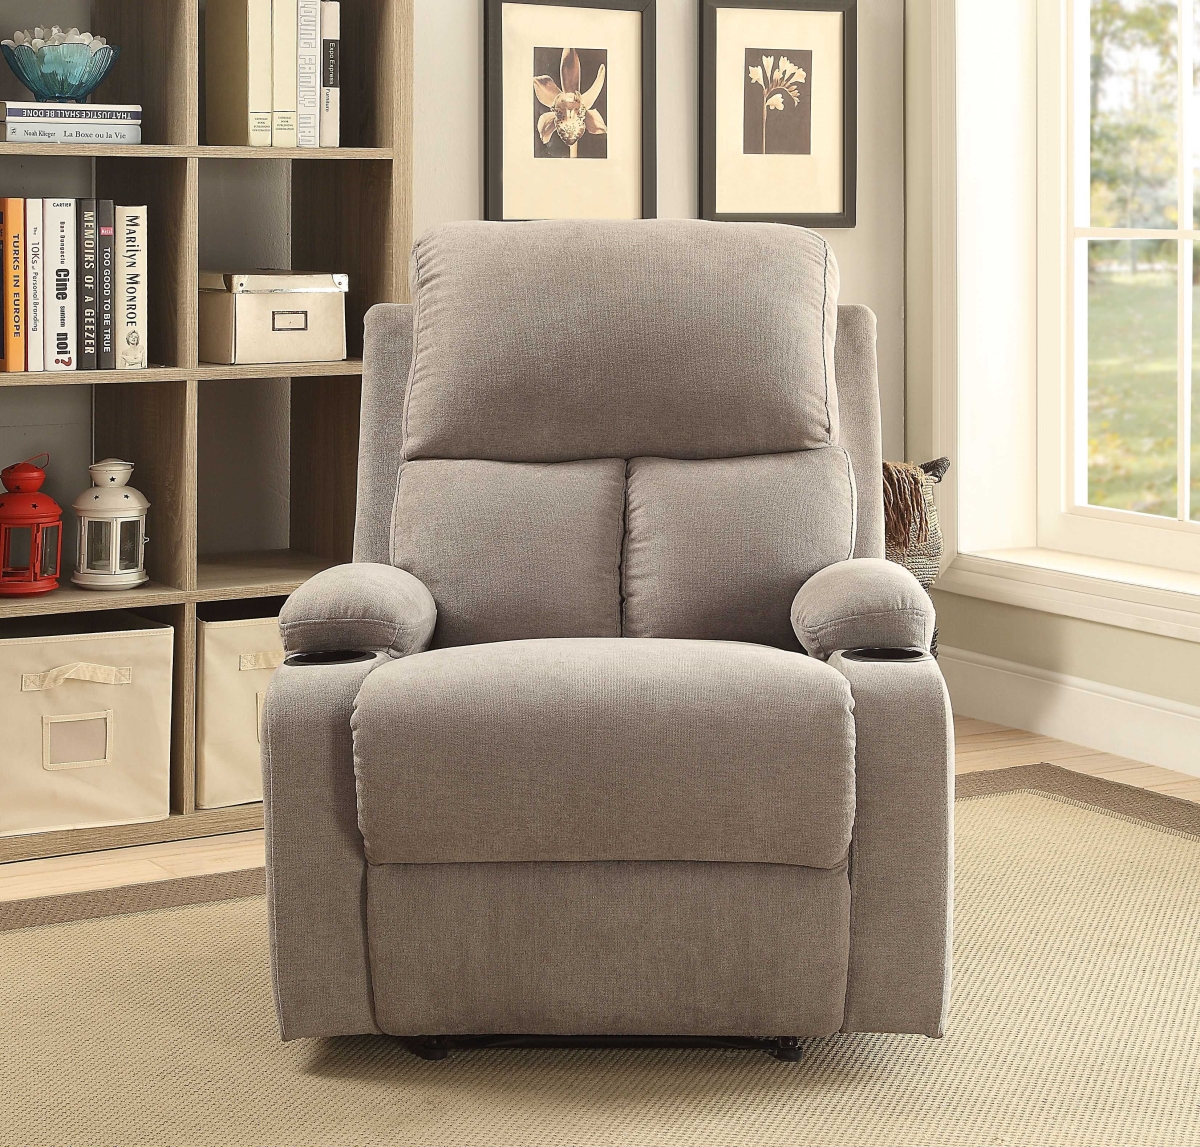 Home Roots Furniture 286184 39 X 32 X 37 In. Linen Fabric & Wood Frame Recliner - Beige